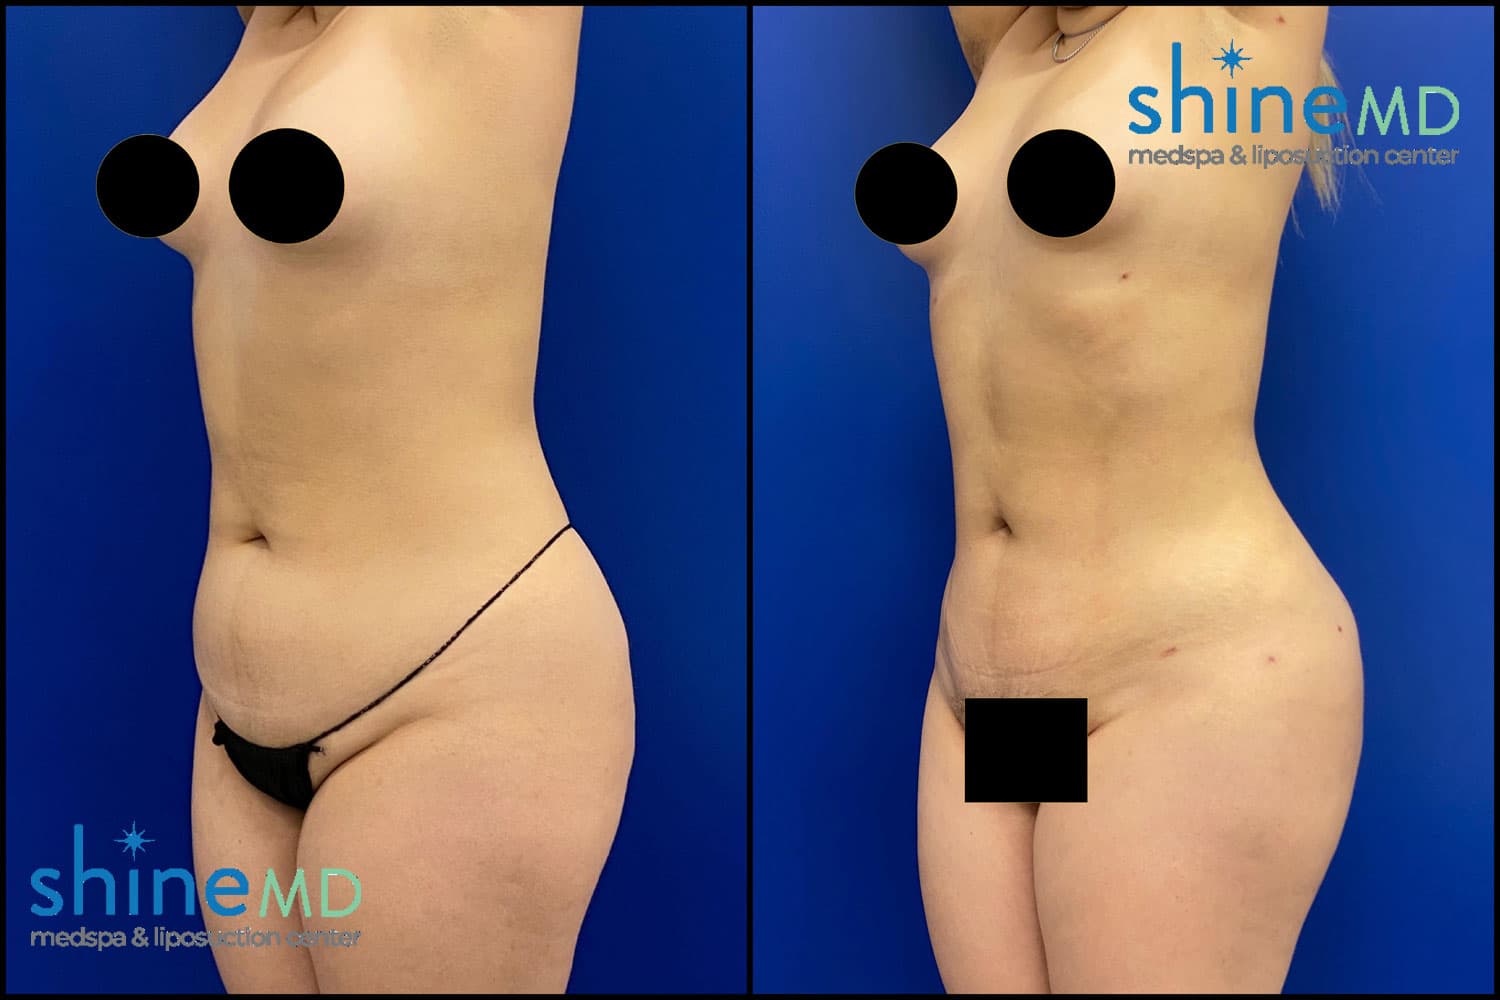 Body Sculpting Liposuction Before & After Photos ShineMD Medspa